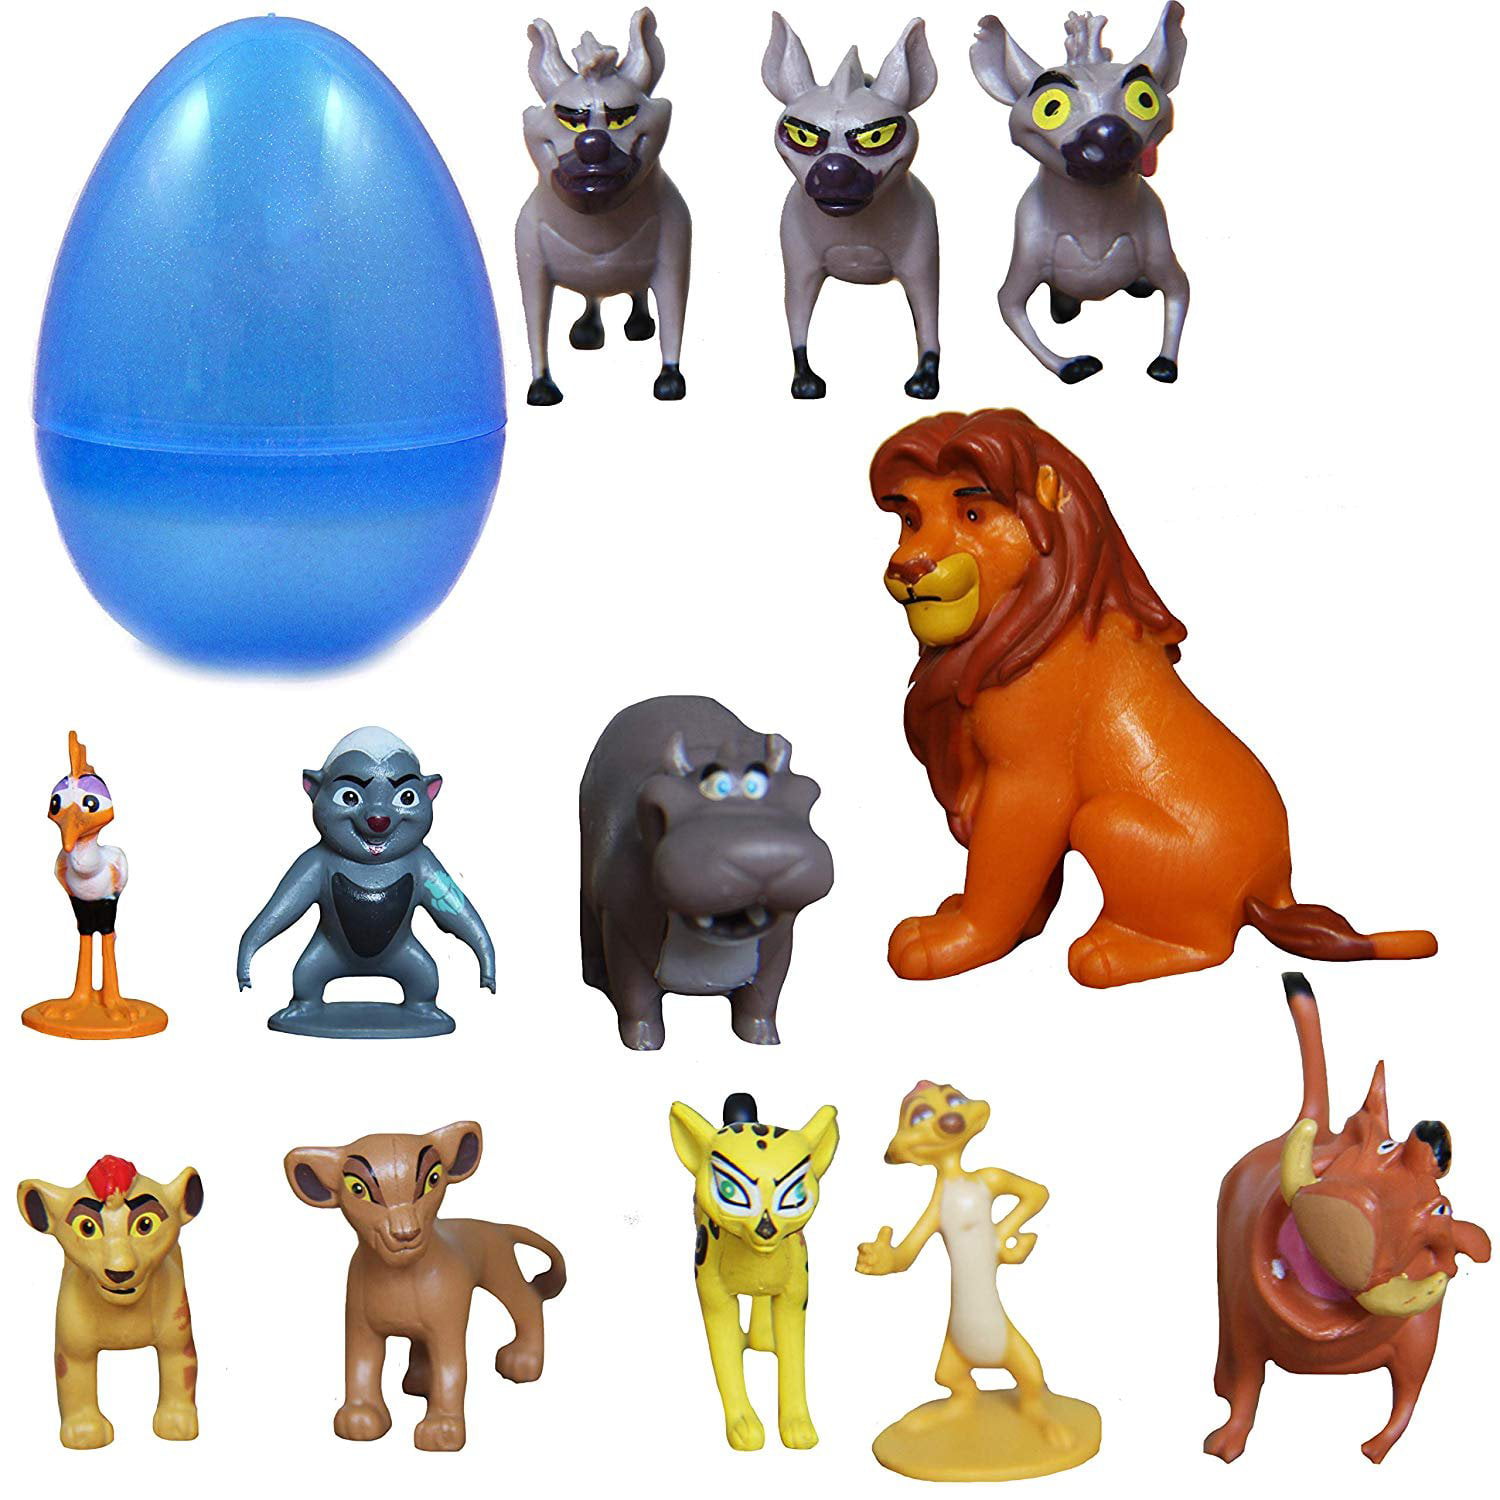 PARK AVE 12 Lion Guard Figures with Jumbo Egg Storage, 1-2